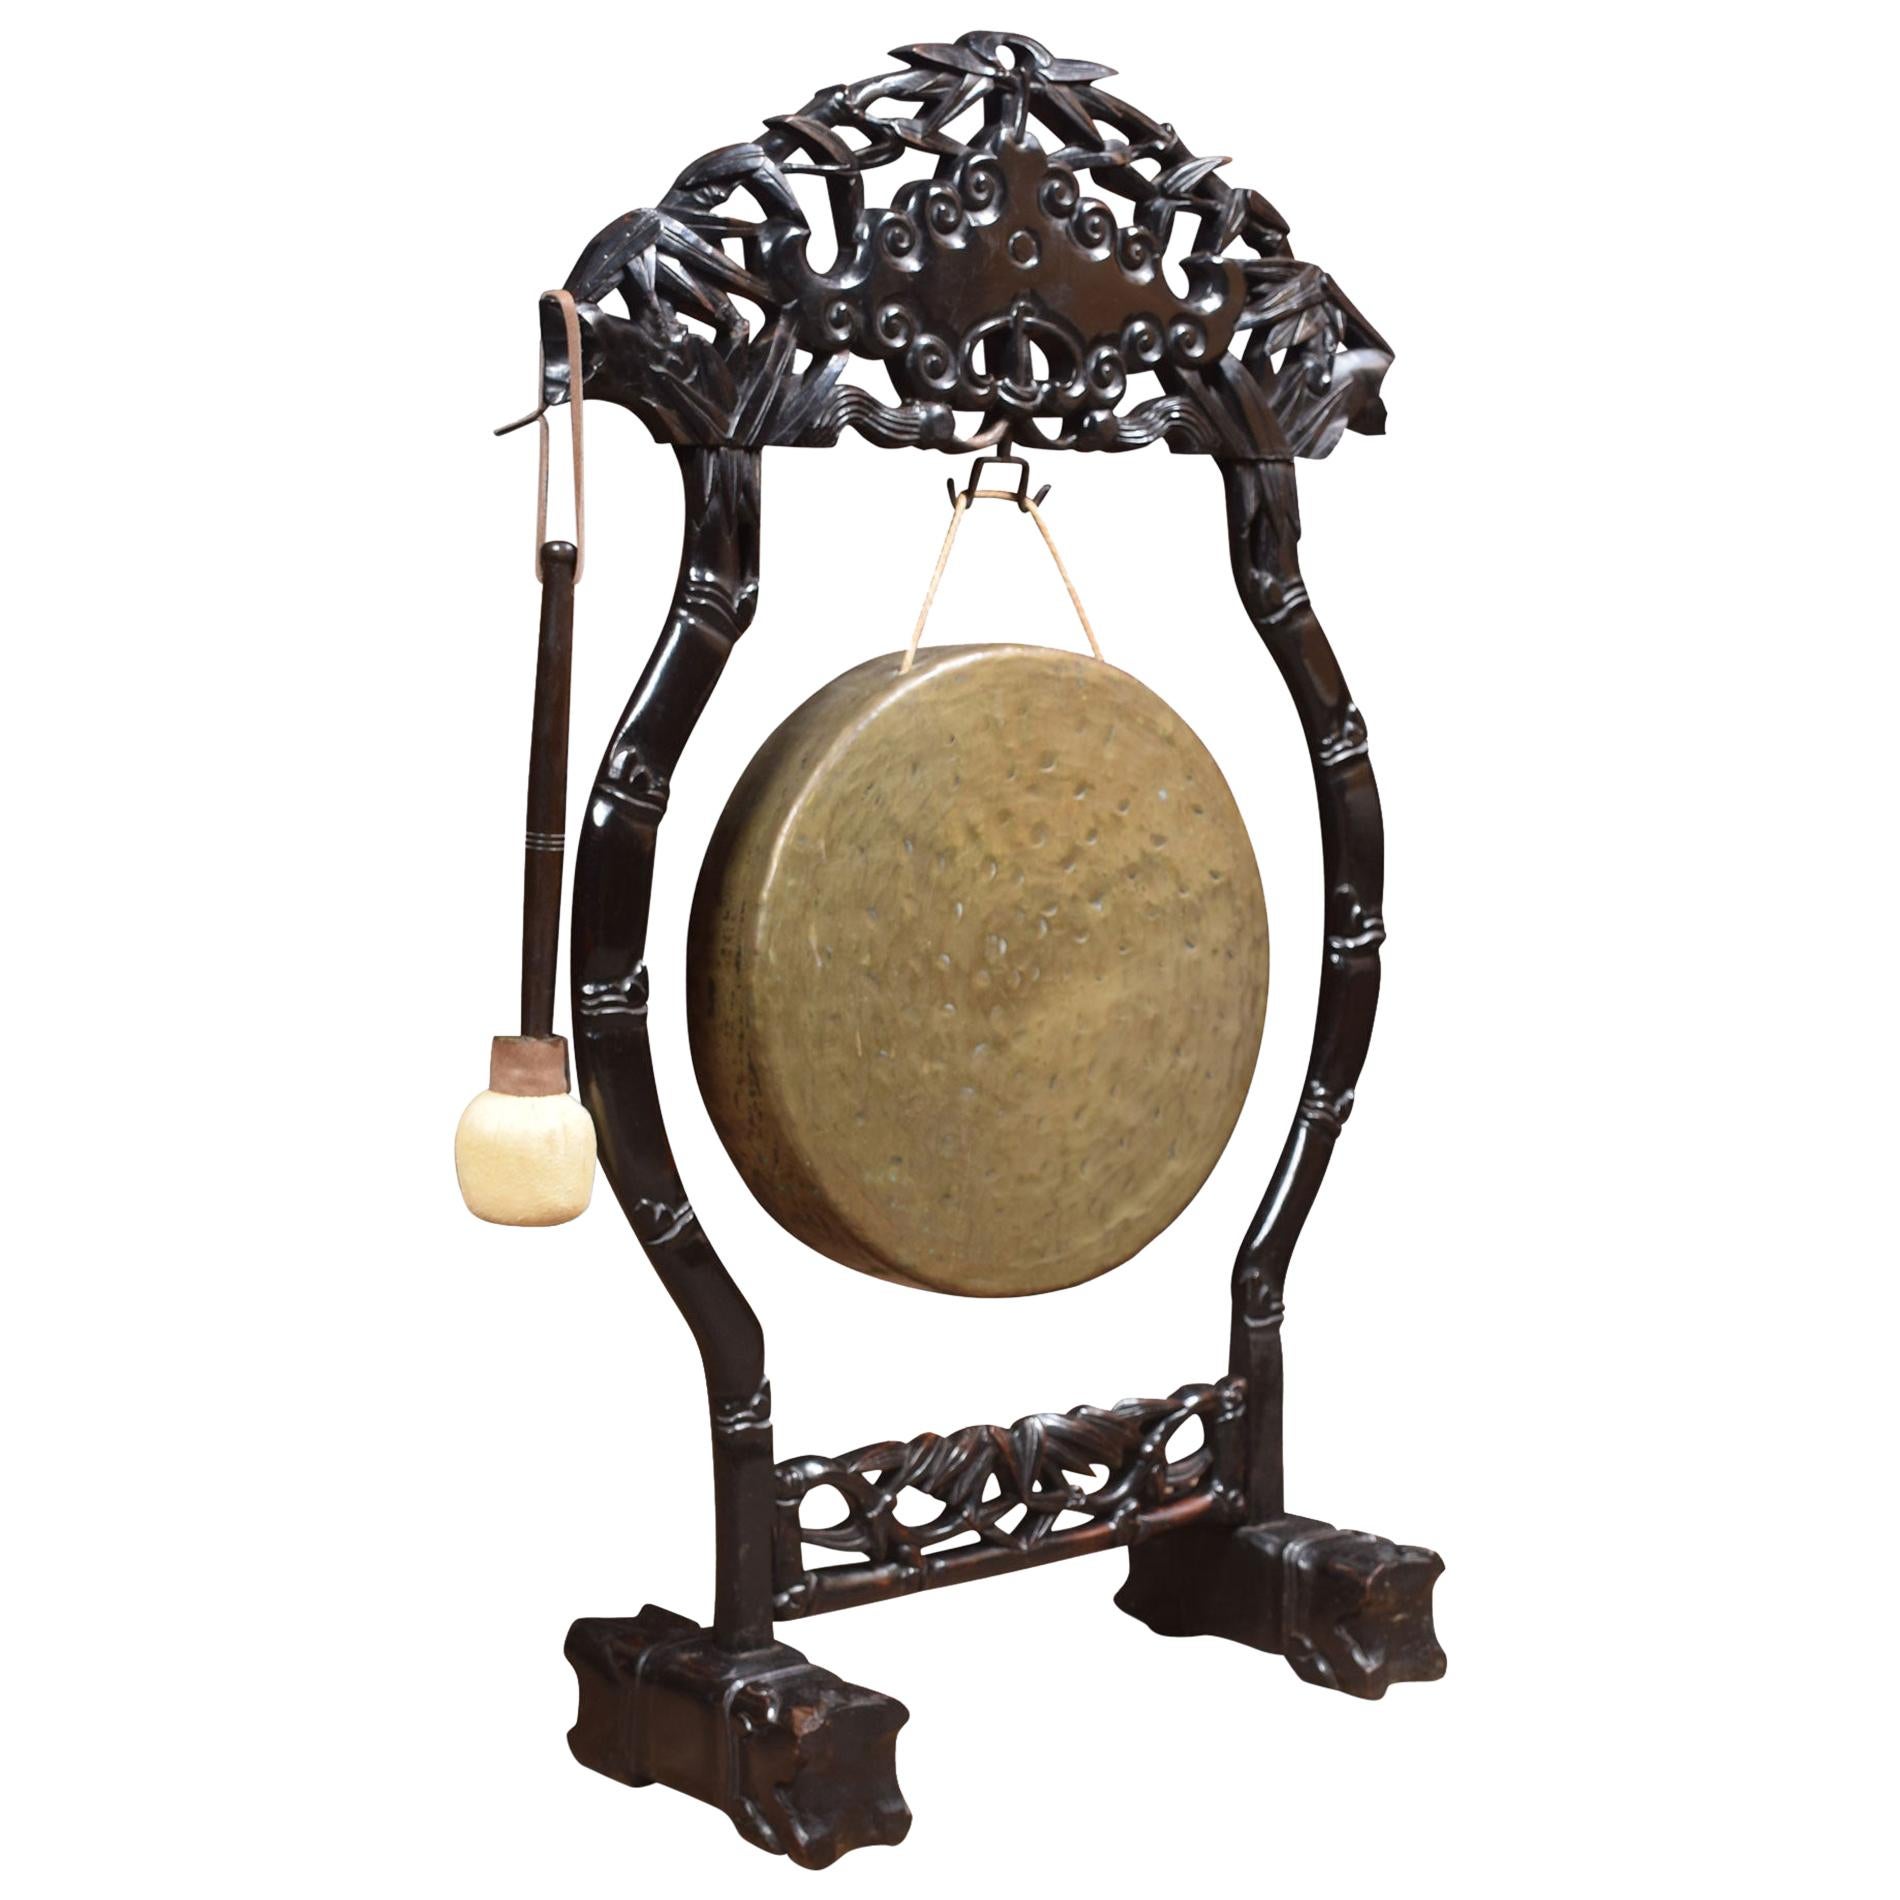 Chinese Carved Dinner Gong